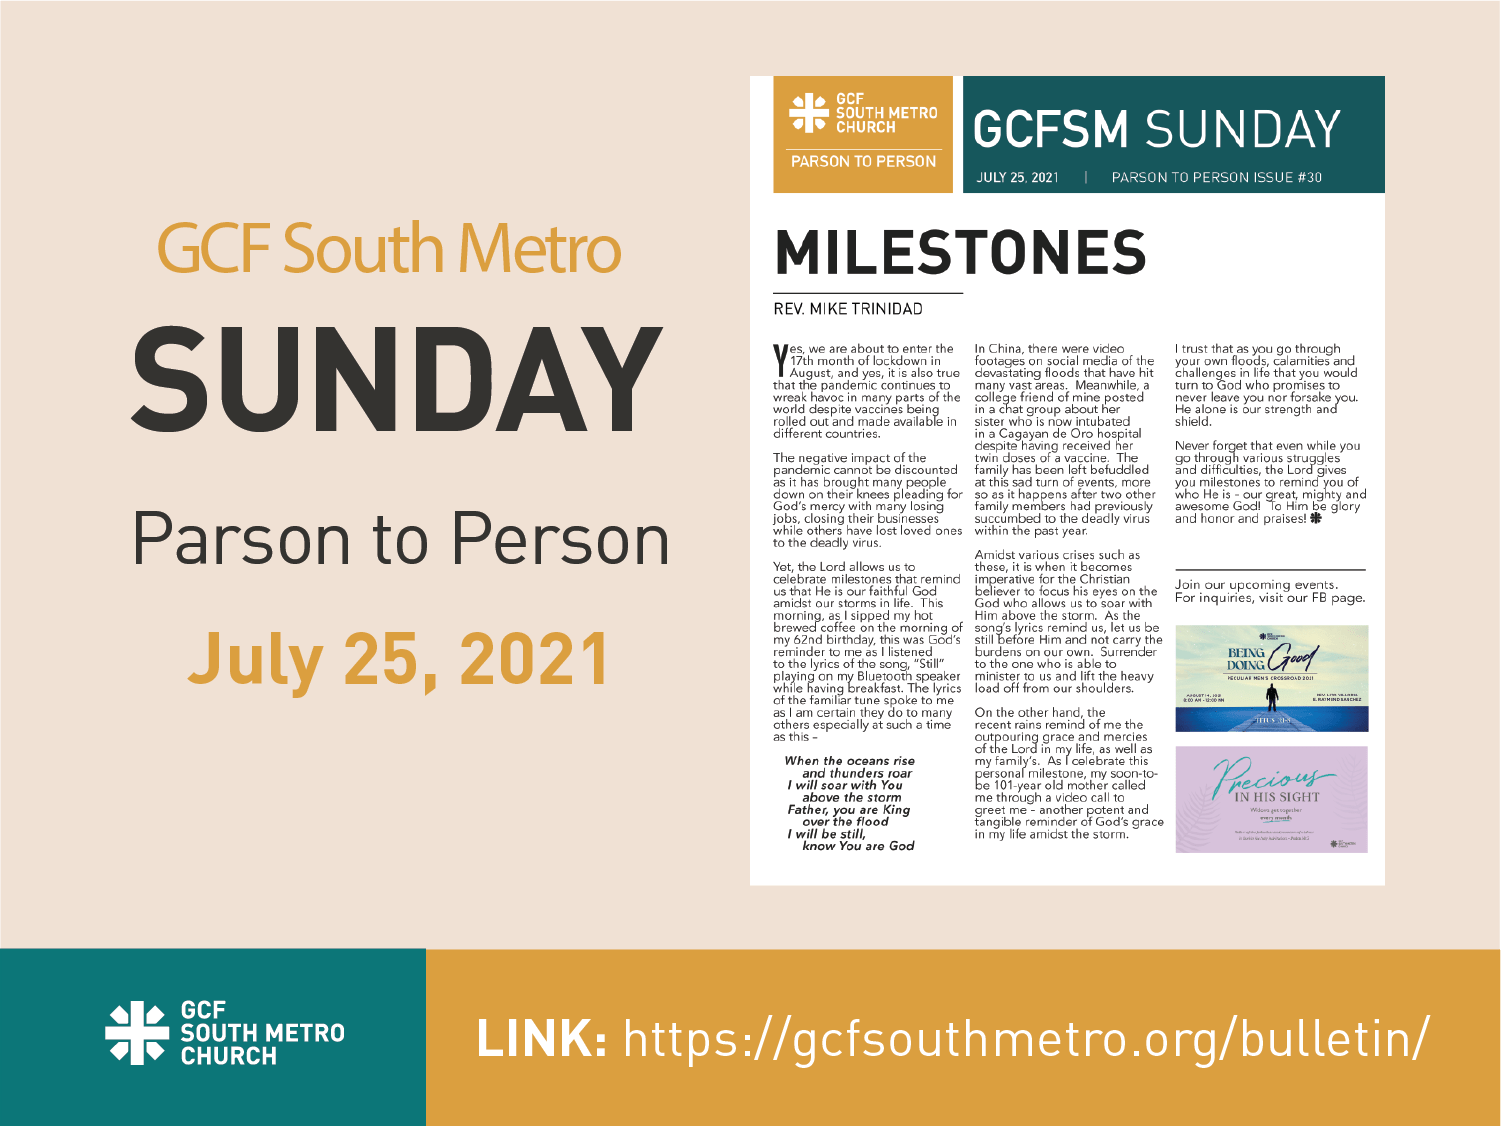 Sunday Bulletin – Parson to Person, July 25, 2021